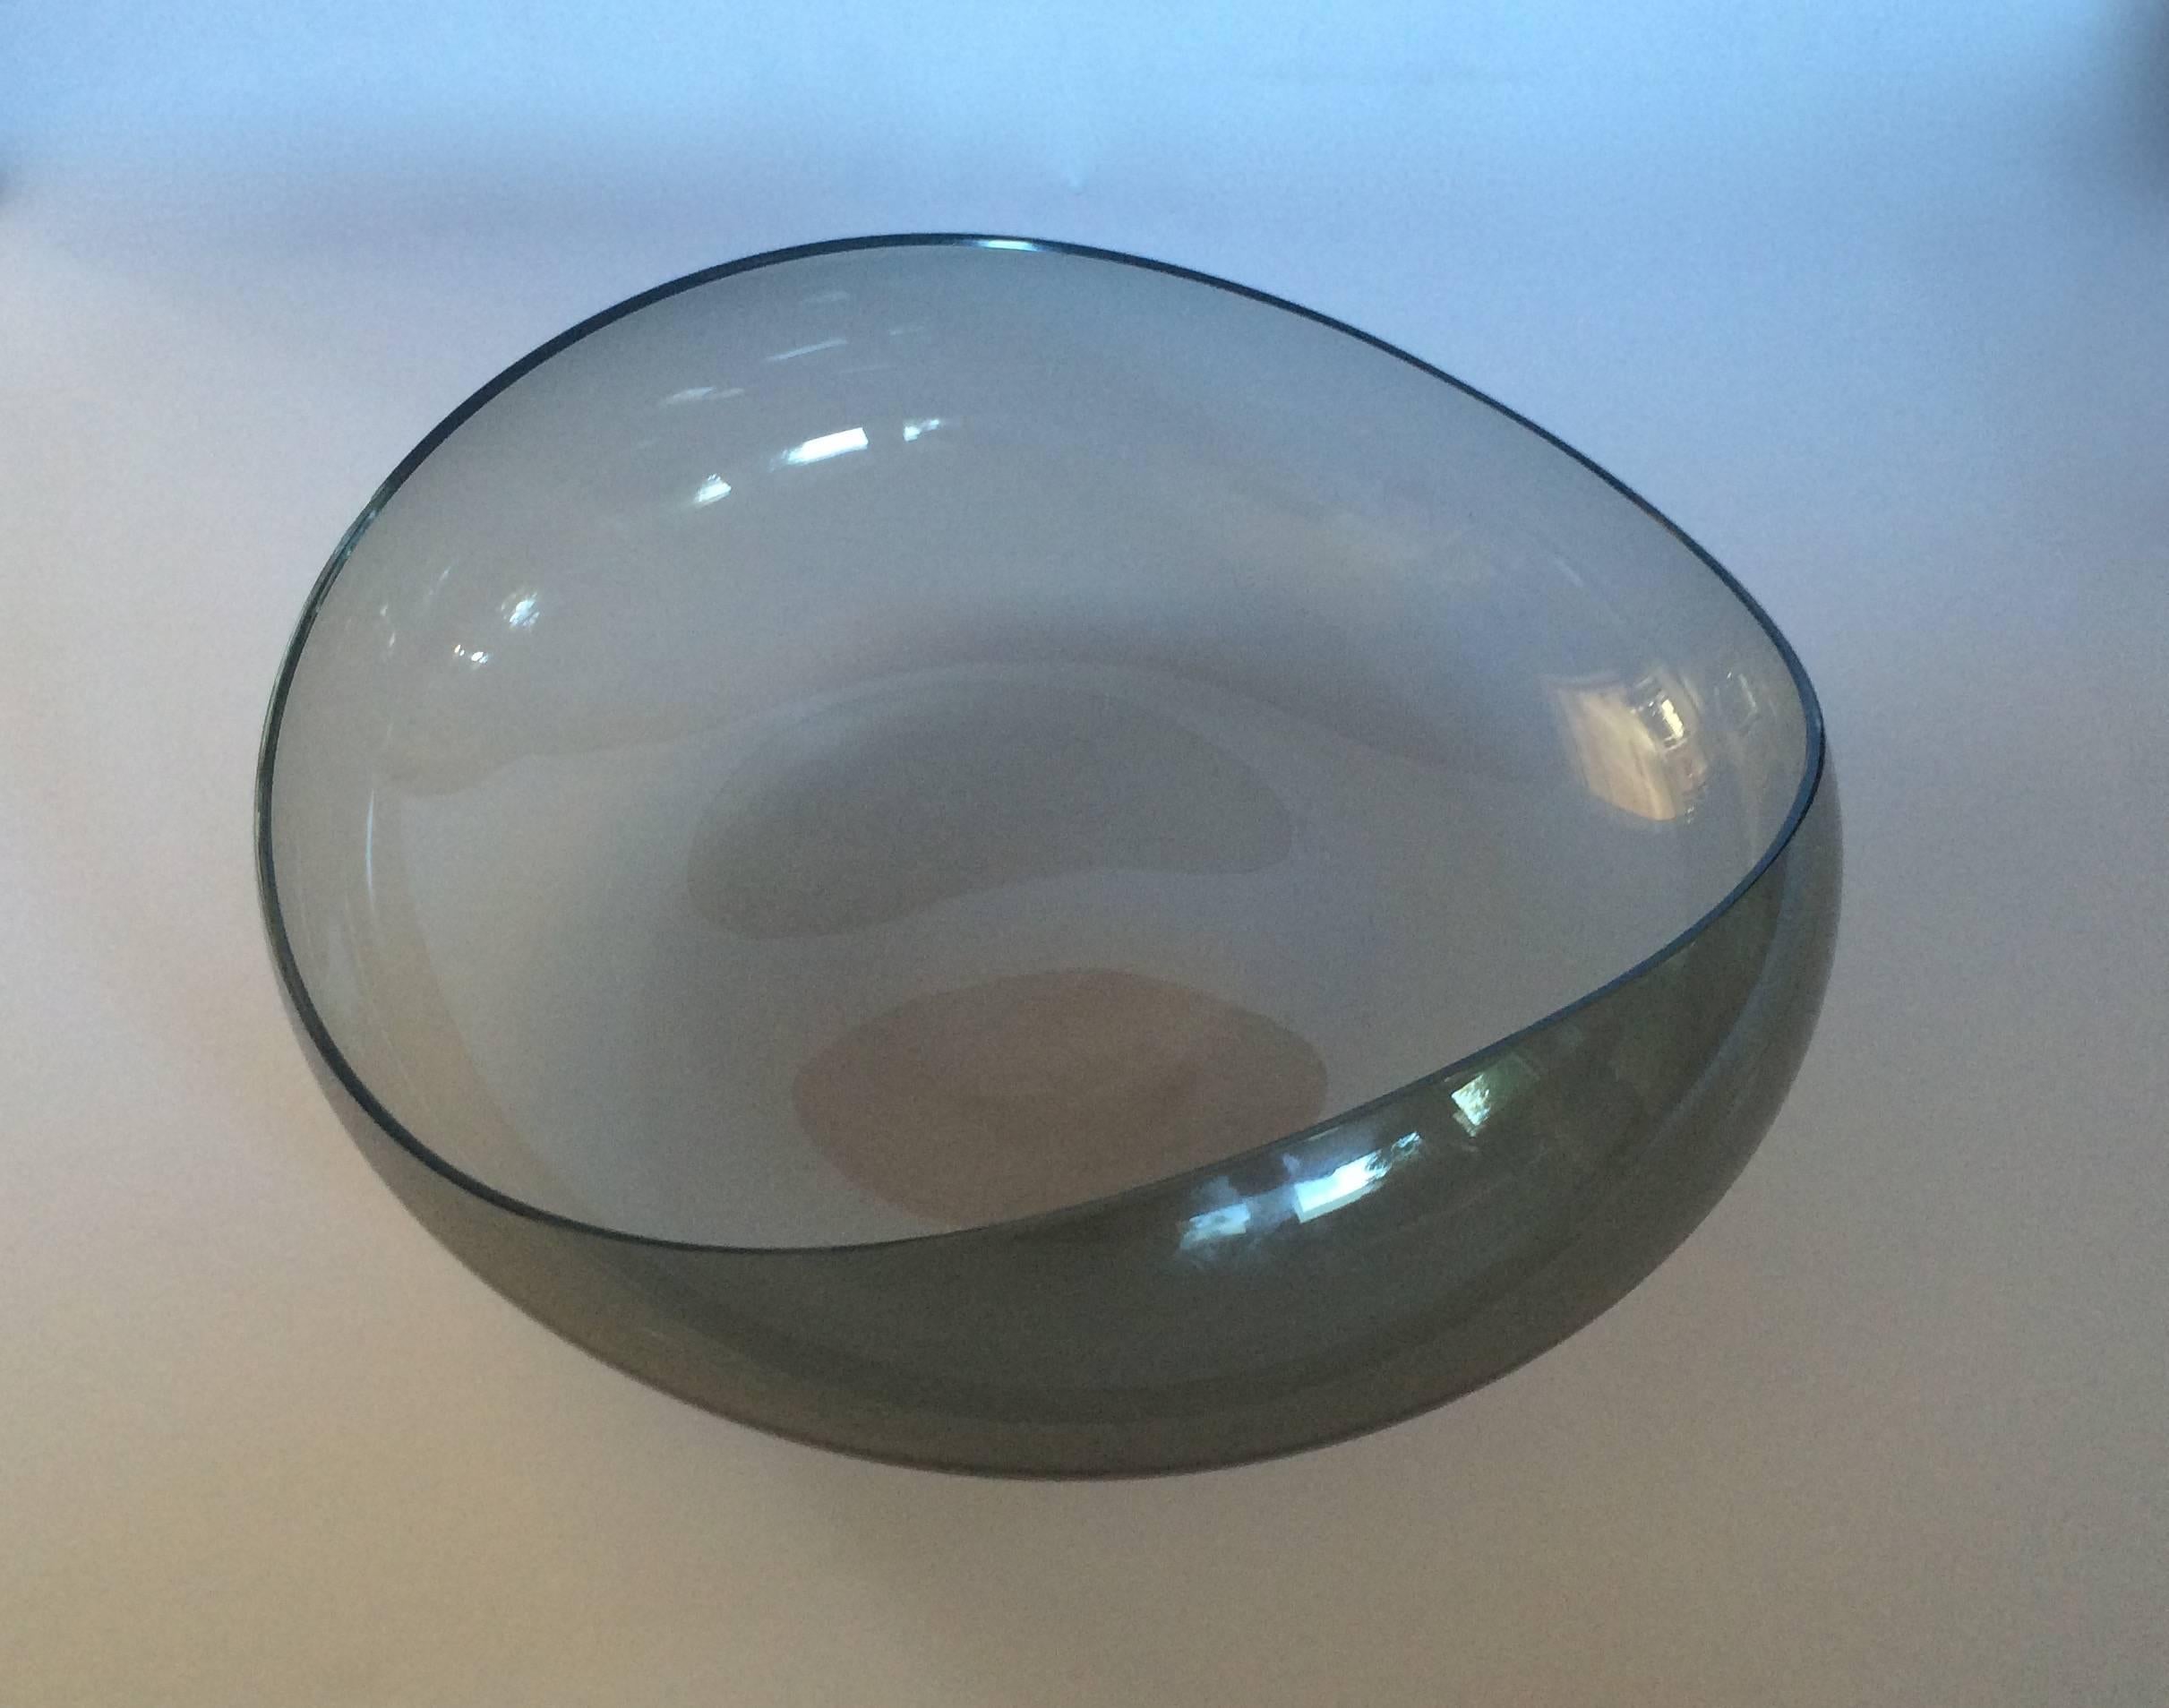 Wilhelm Wagenfeld (attributed)
Curved bowl
Circa 1950s-60s
blown smoke glass
14.5 inches in diameter

Wilhelm Wagenfeld (1900-1990) was a disciple of the Bauhaus who went on to have a celebrated career as an industrial designer in Germany. He